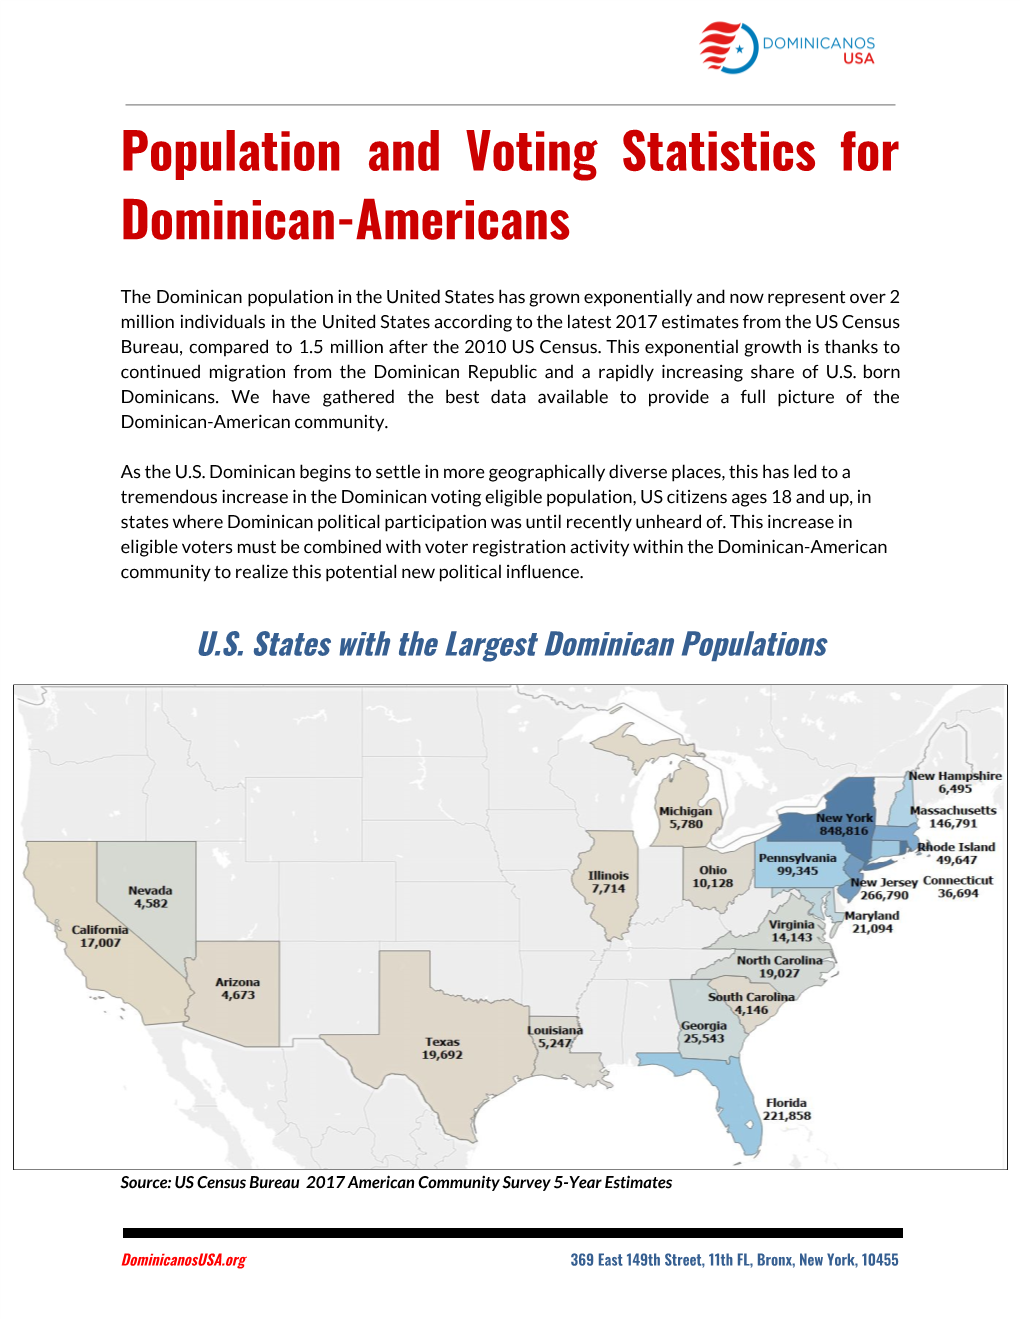 Population and Voting Statistics for Dominican-Americans